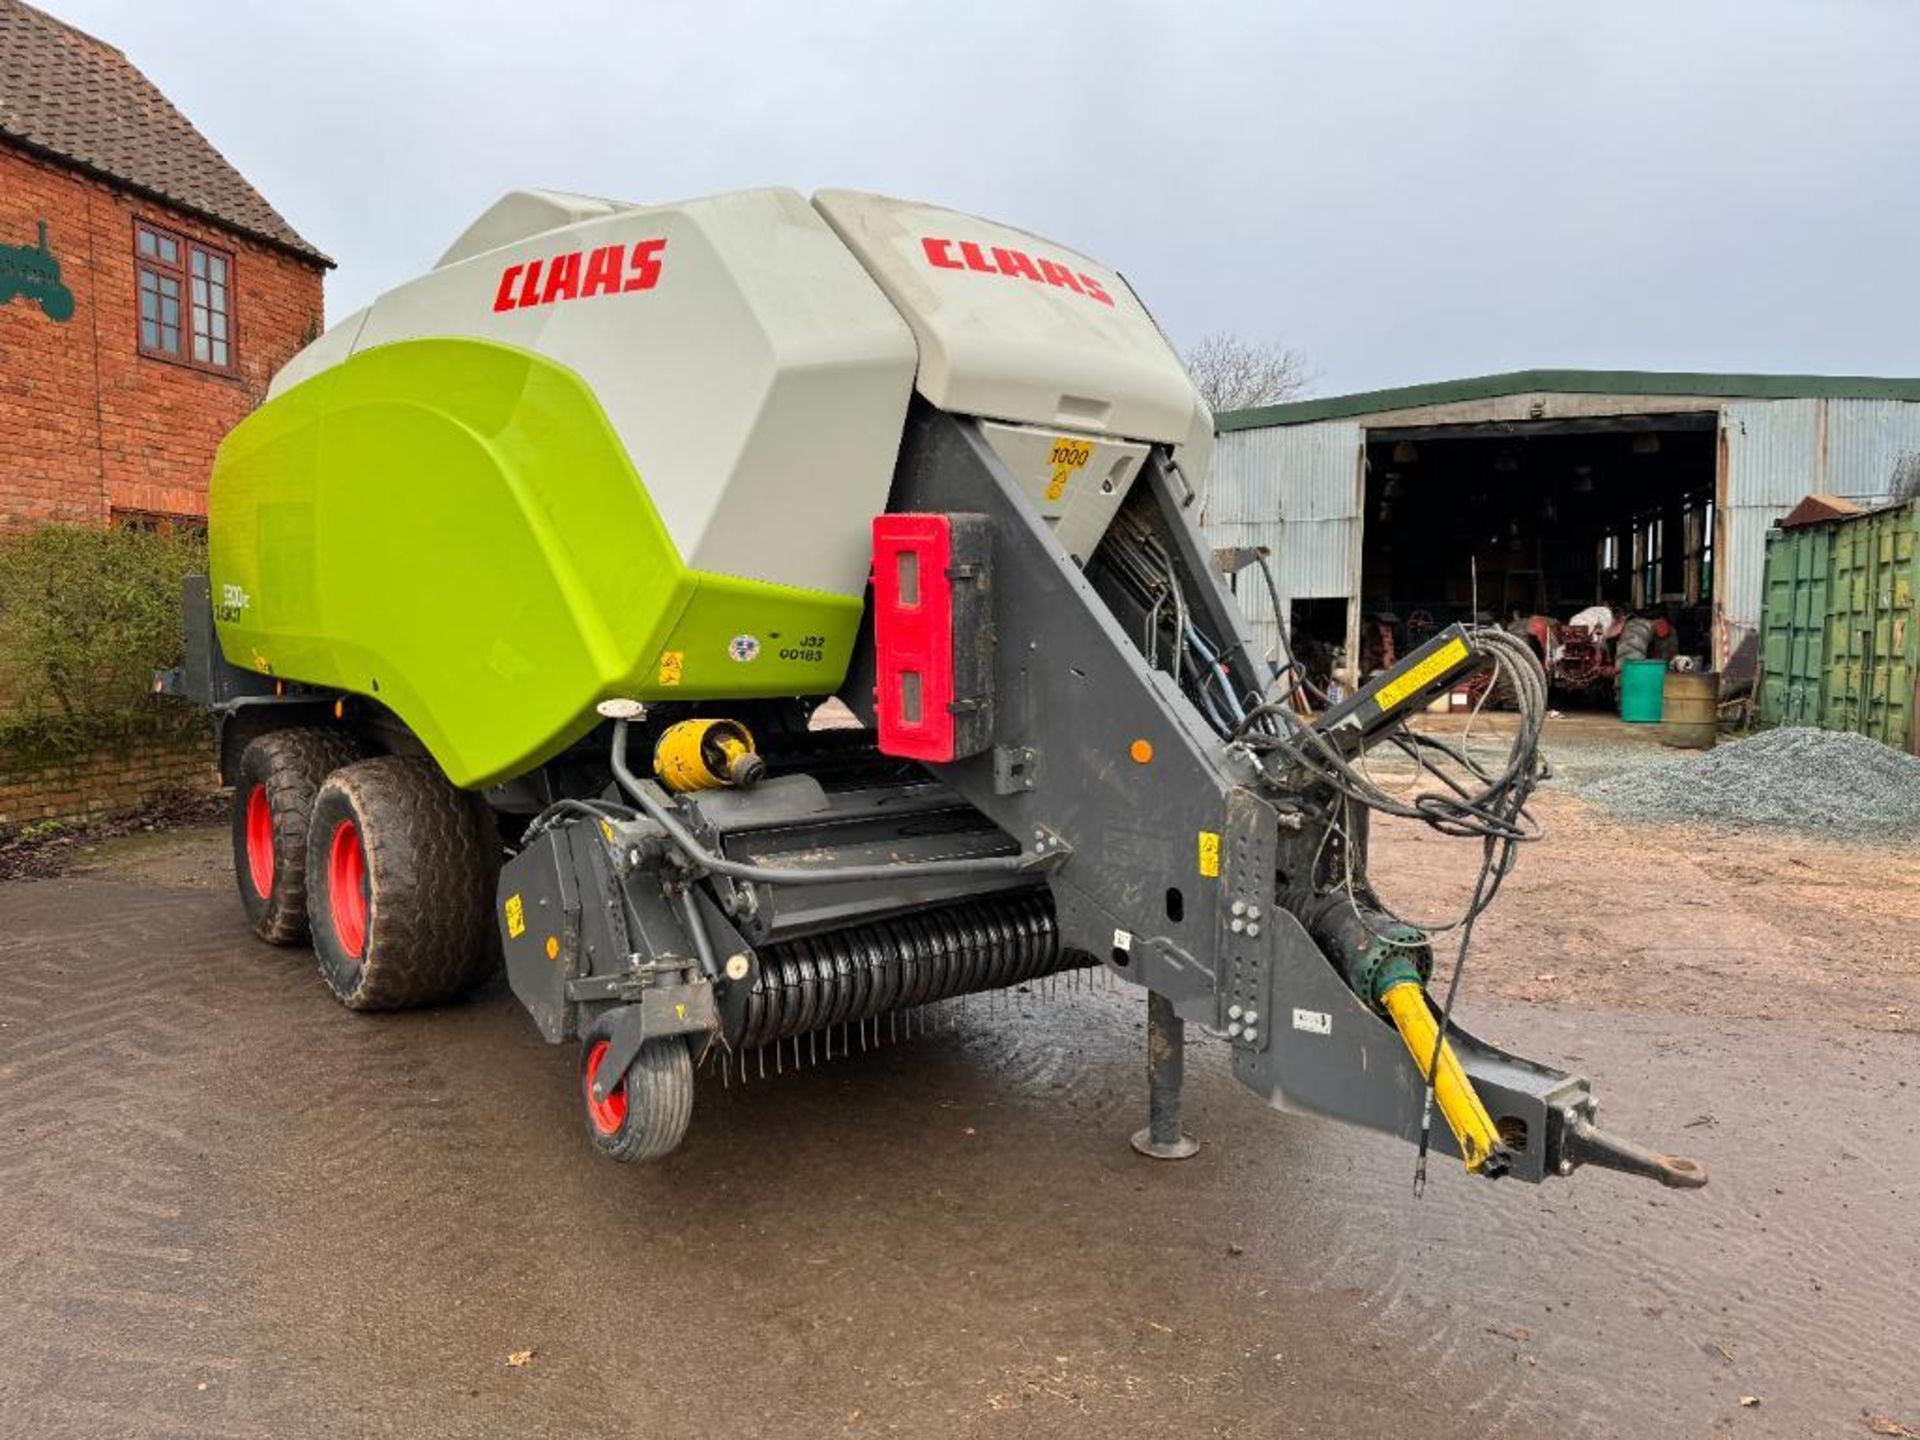 2017 Claas 5300RC Quadrant 6 string twin axle baler and Claas communicator with 120x90 chamber, bale - Image 17 of 33